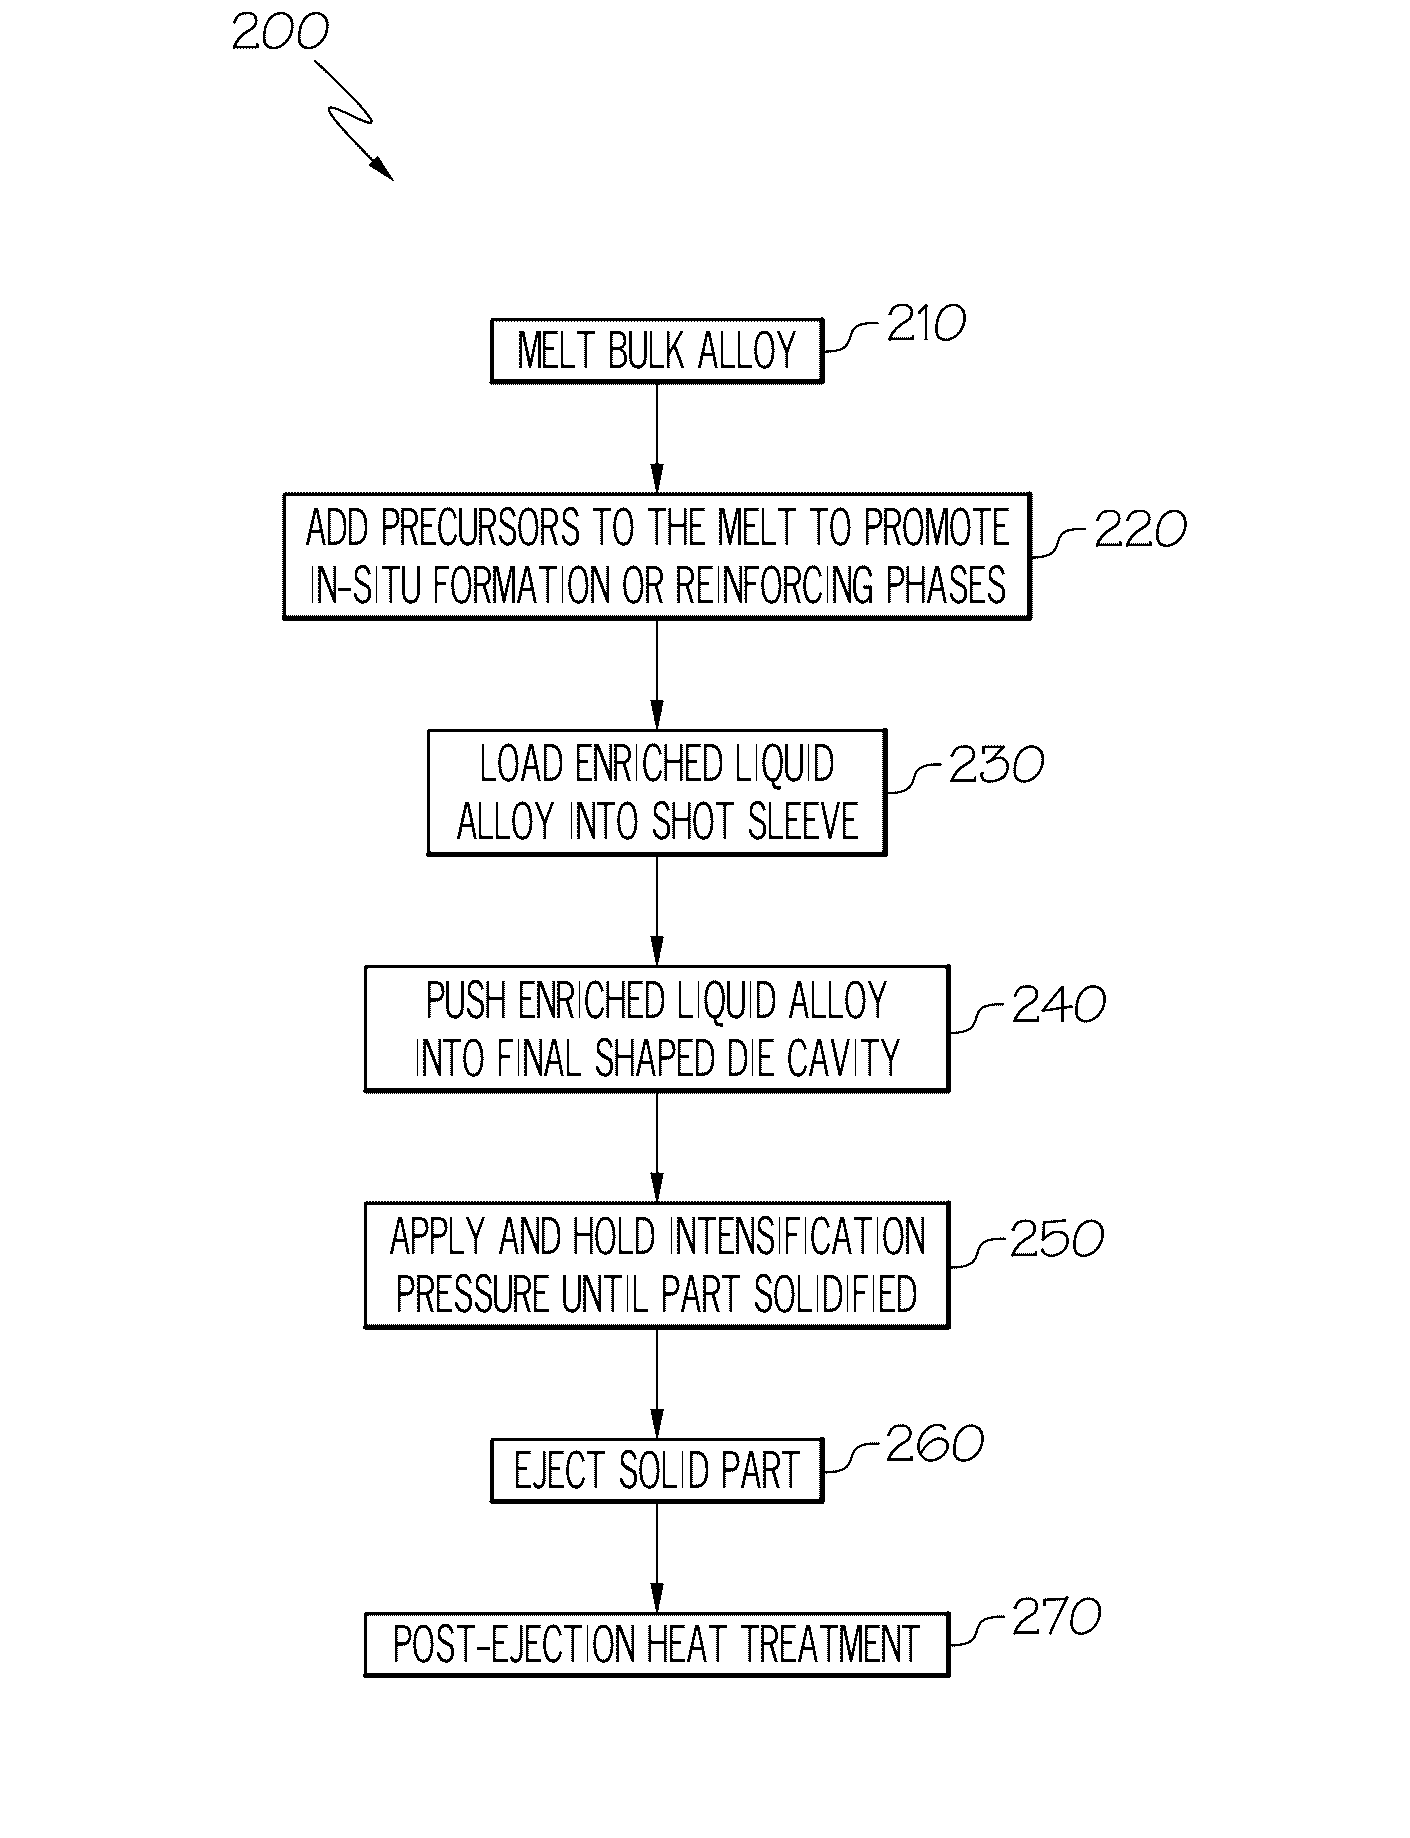 Method of Making Aluminum or Magnesium Based Composite Engine Blocks or Other Parts With In-Situ Formed Reinforced Phases Through Squeeze Casting or Semi-Solid Metal Forming and Post Heat Treatment